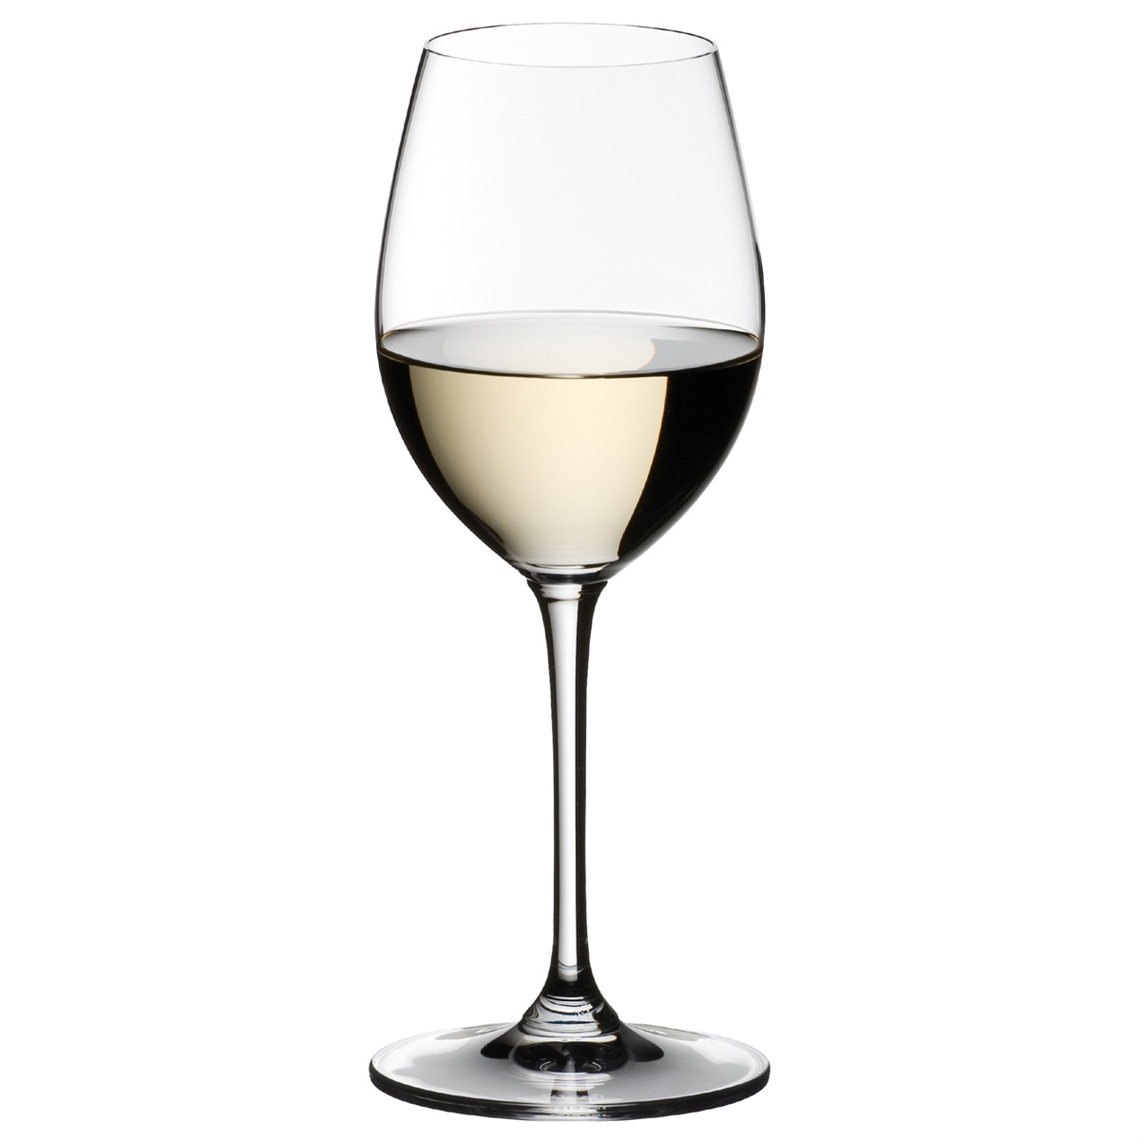 View more schott zwiesel tritan crystal glass from our Dessert Wine Glasses range